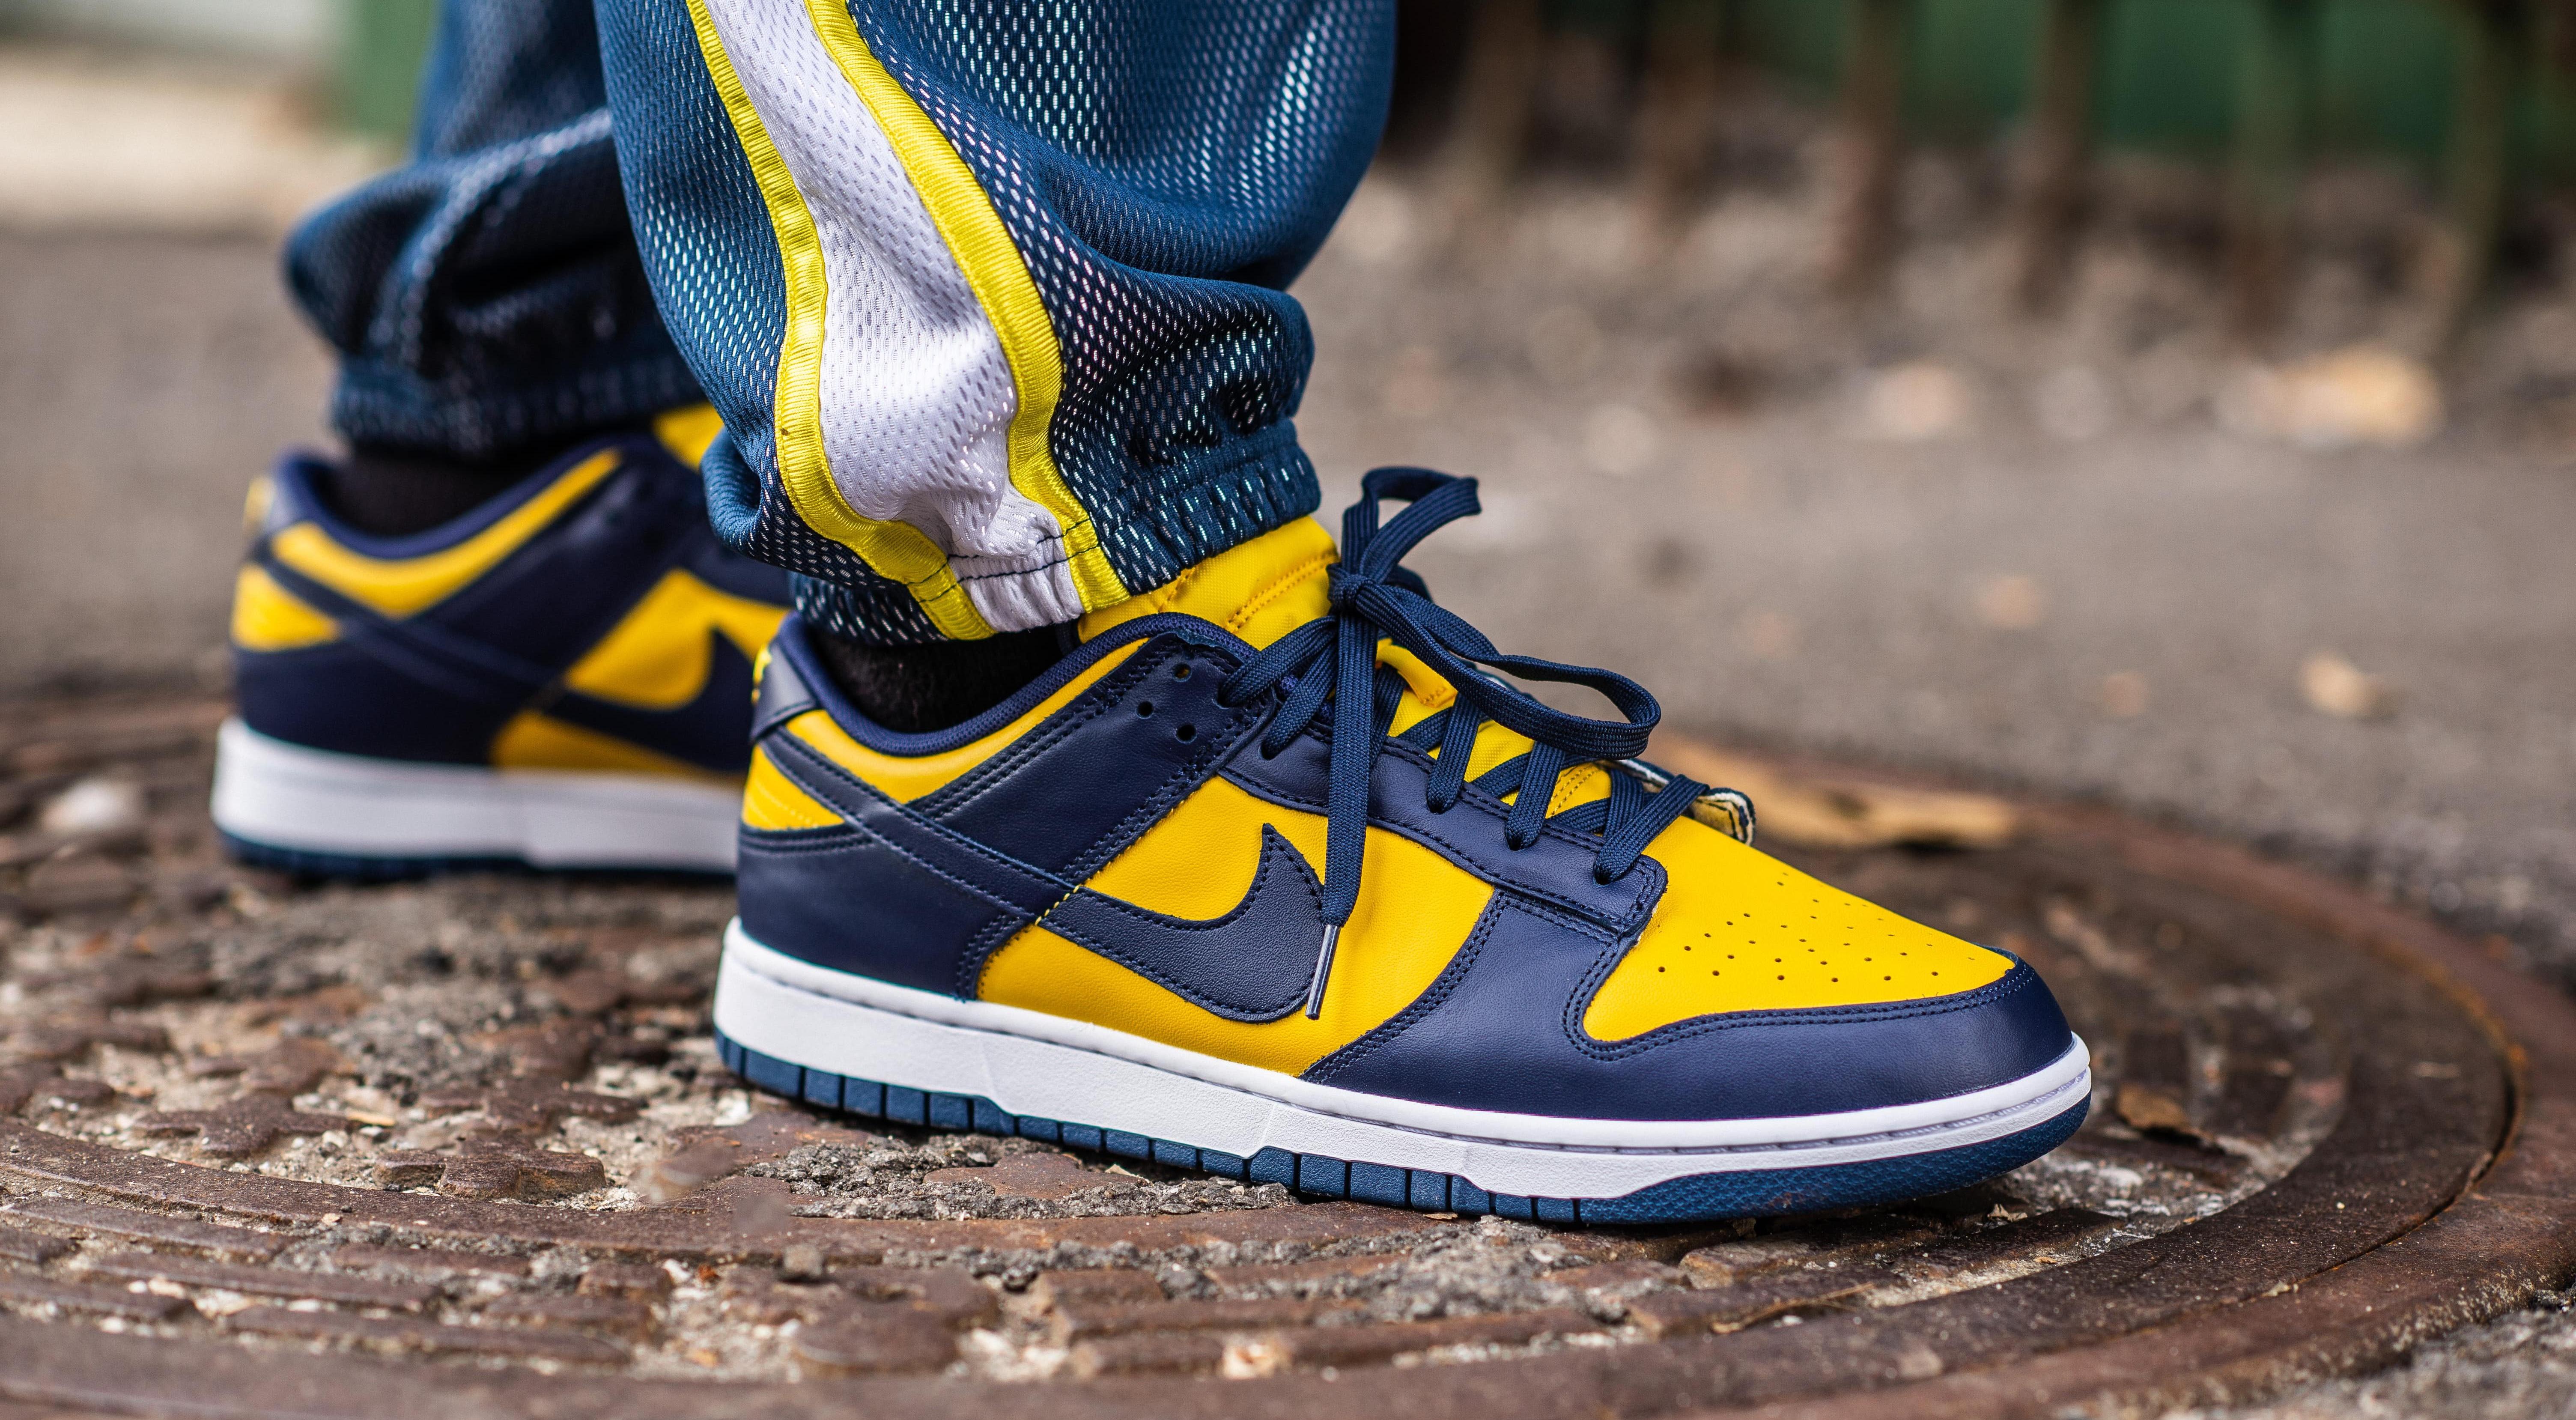 Sneakers Release – Nike Dunk Low “Michigan” and